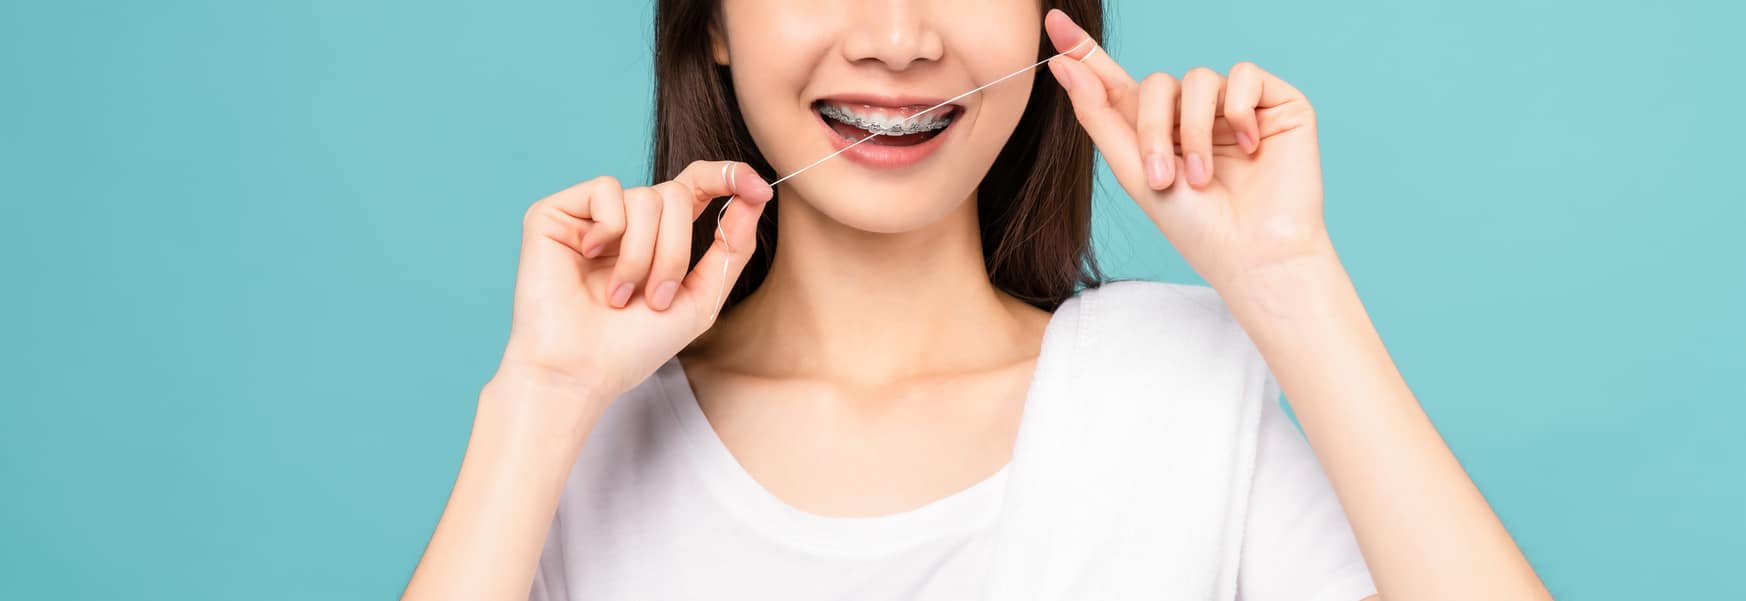 Smiling Asian woman cleaning braces on teeth with dental floss on blue background, Concept oral hygiene and health care.